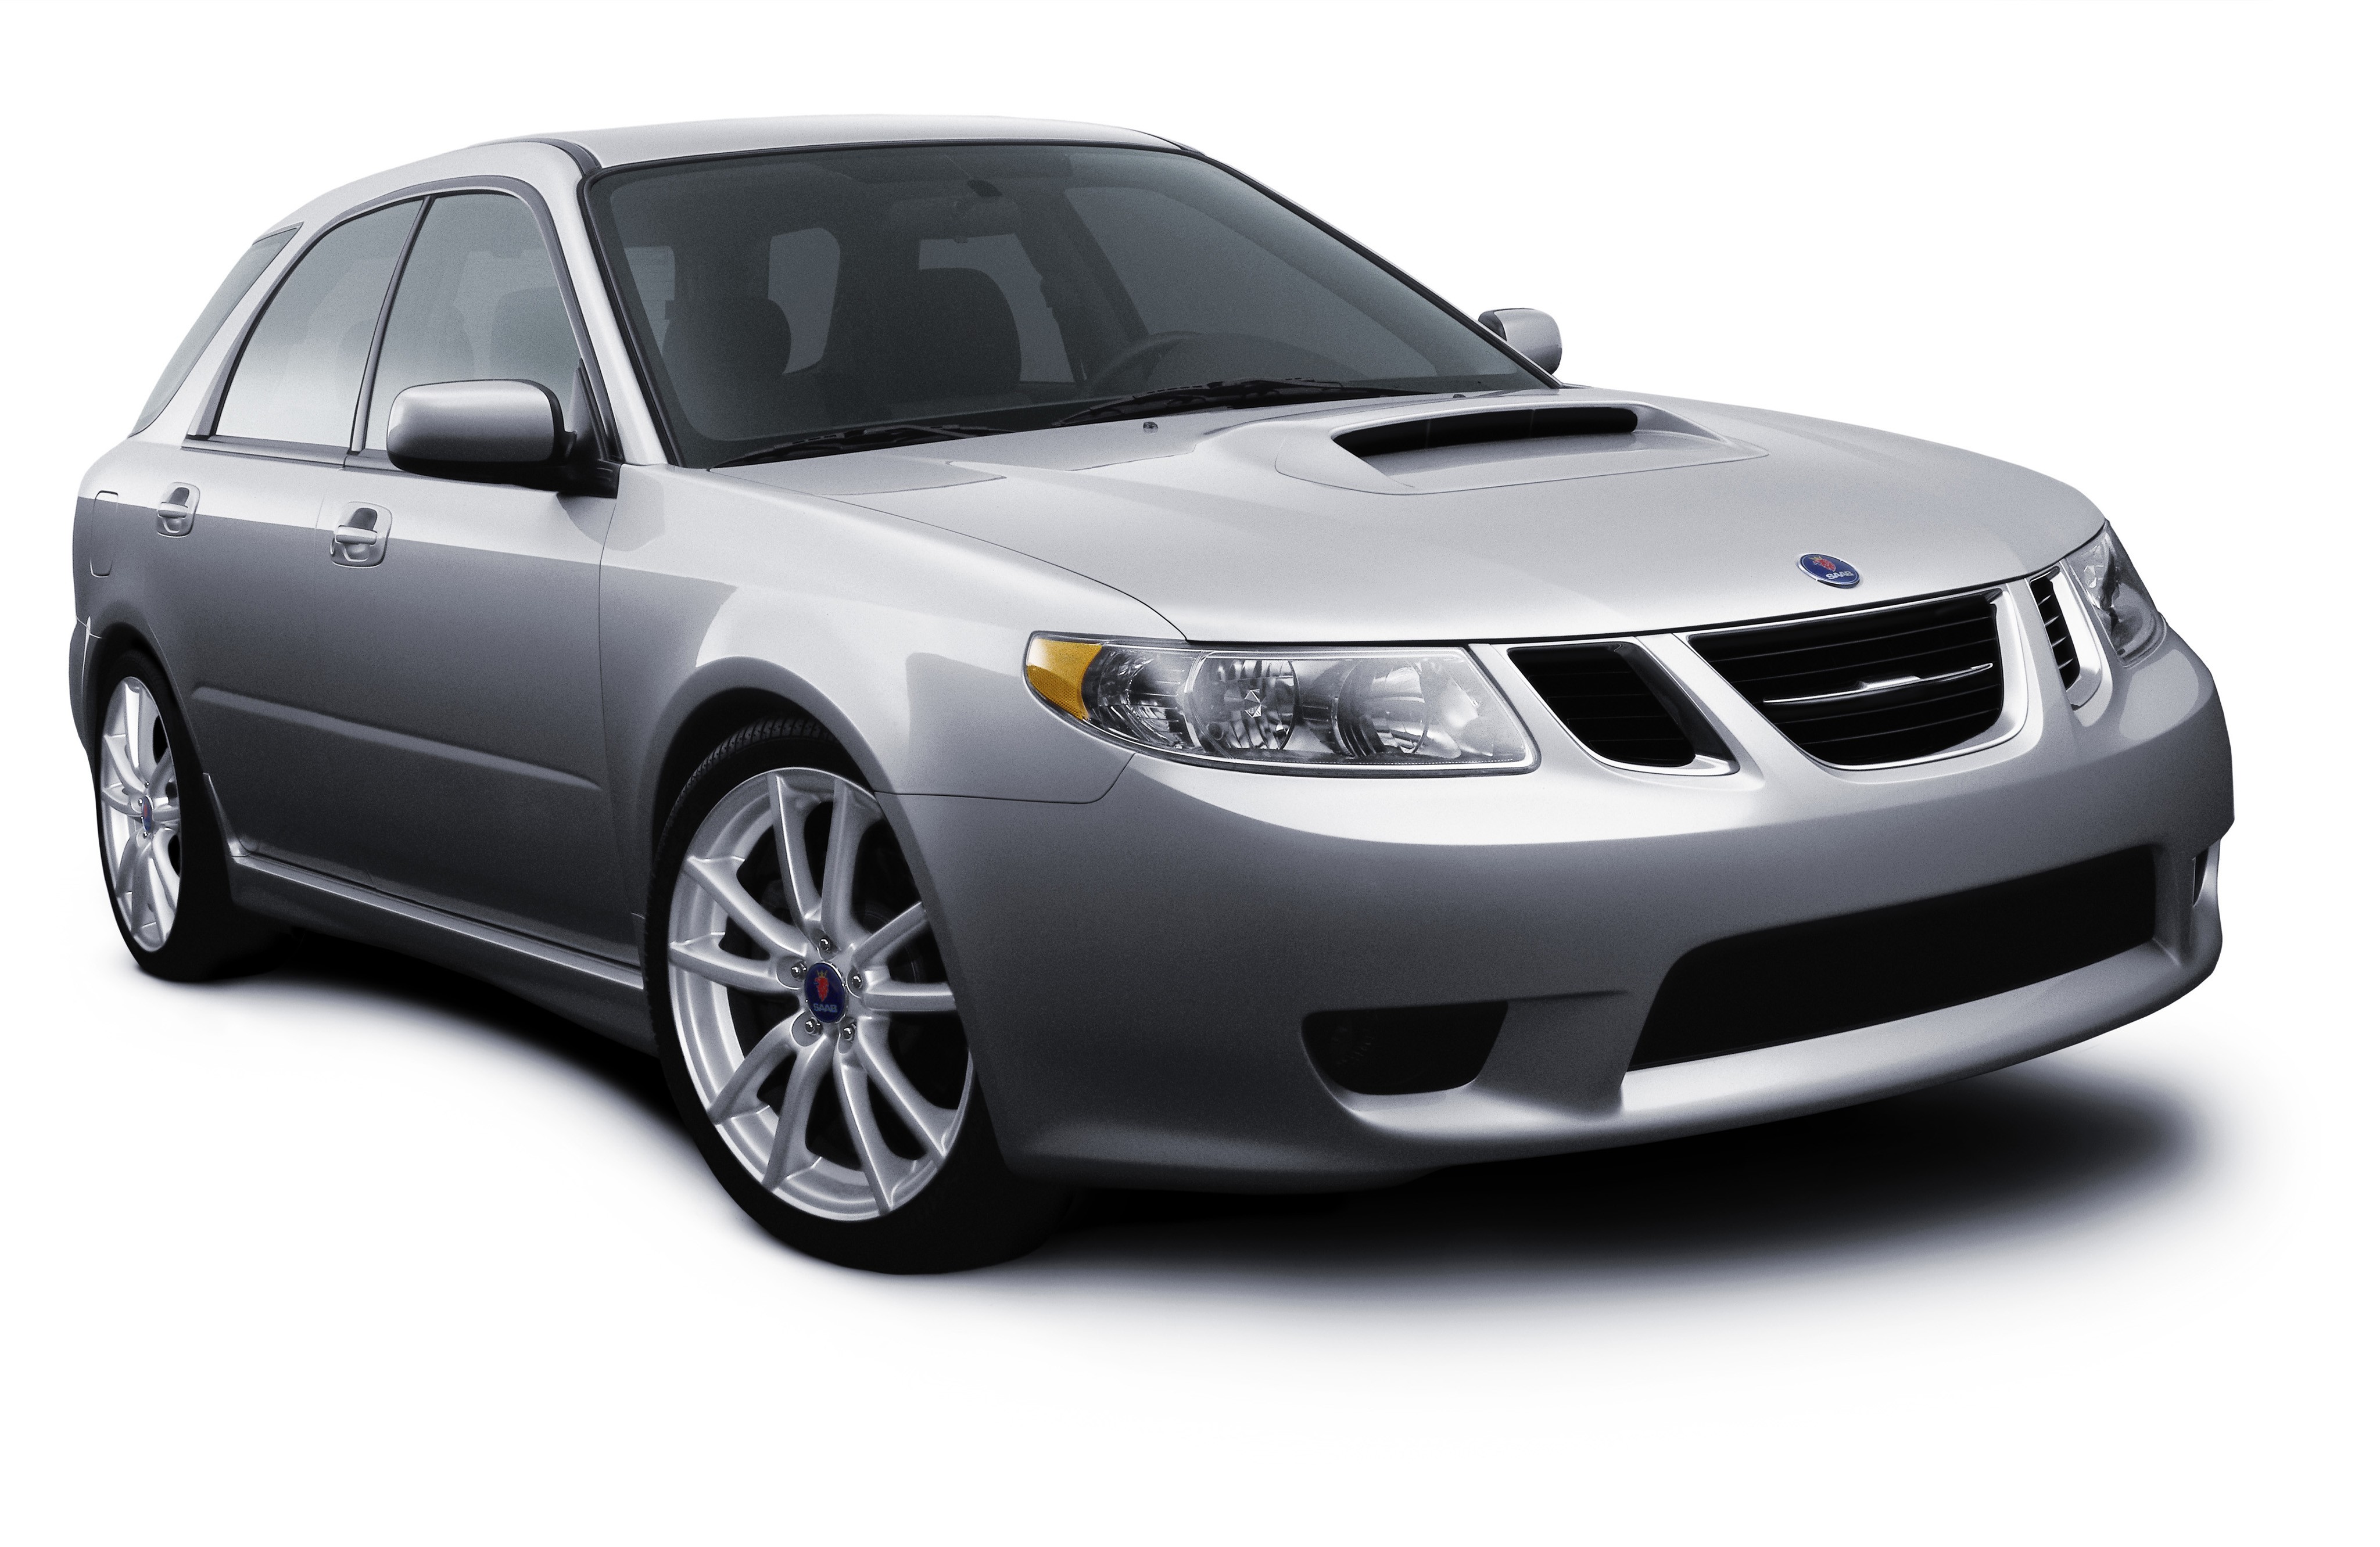 Amazing Saab Pictures & Backgrounds